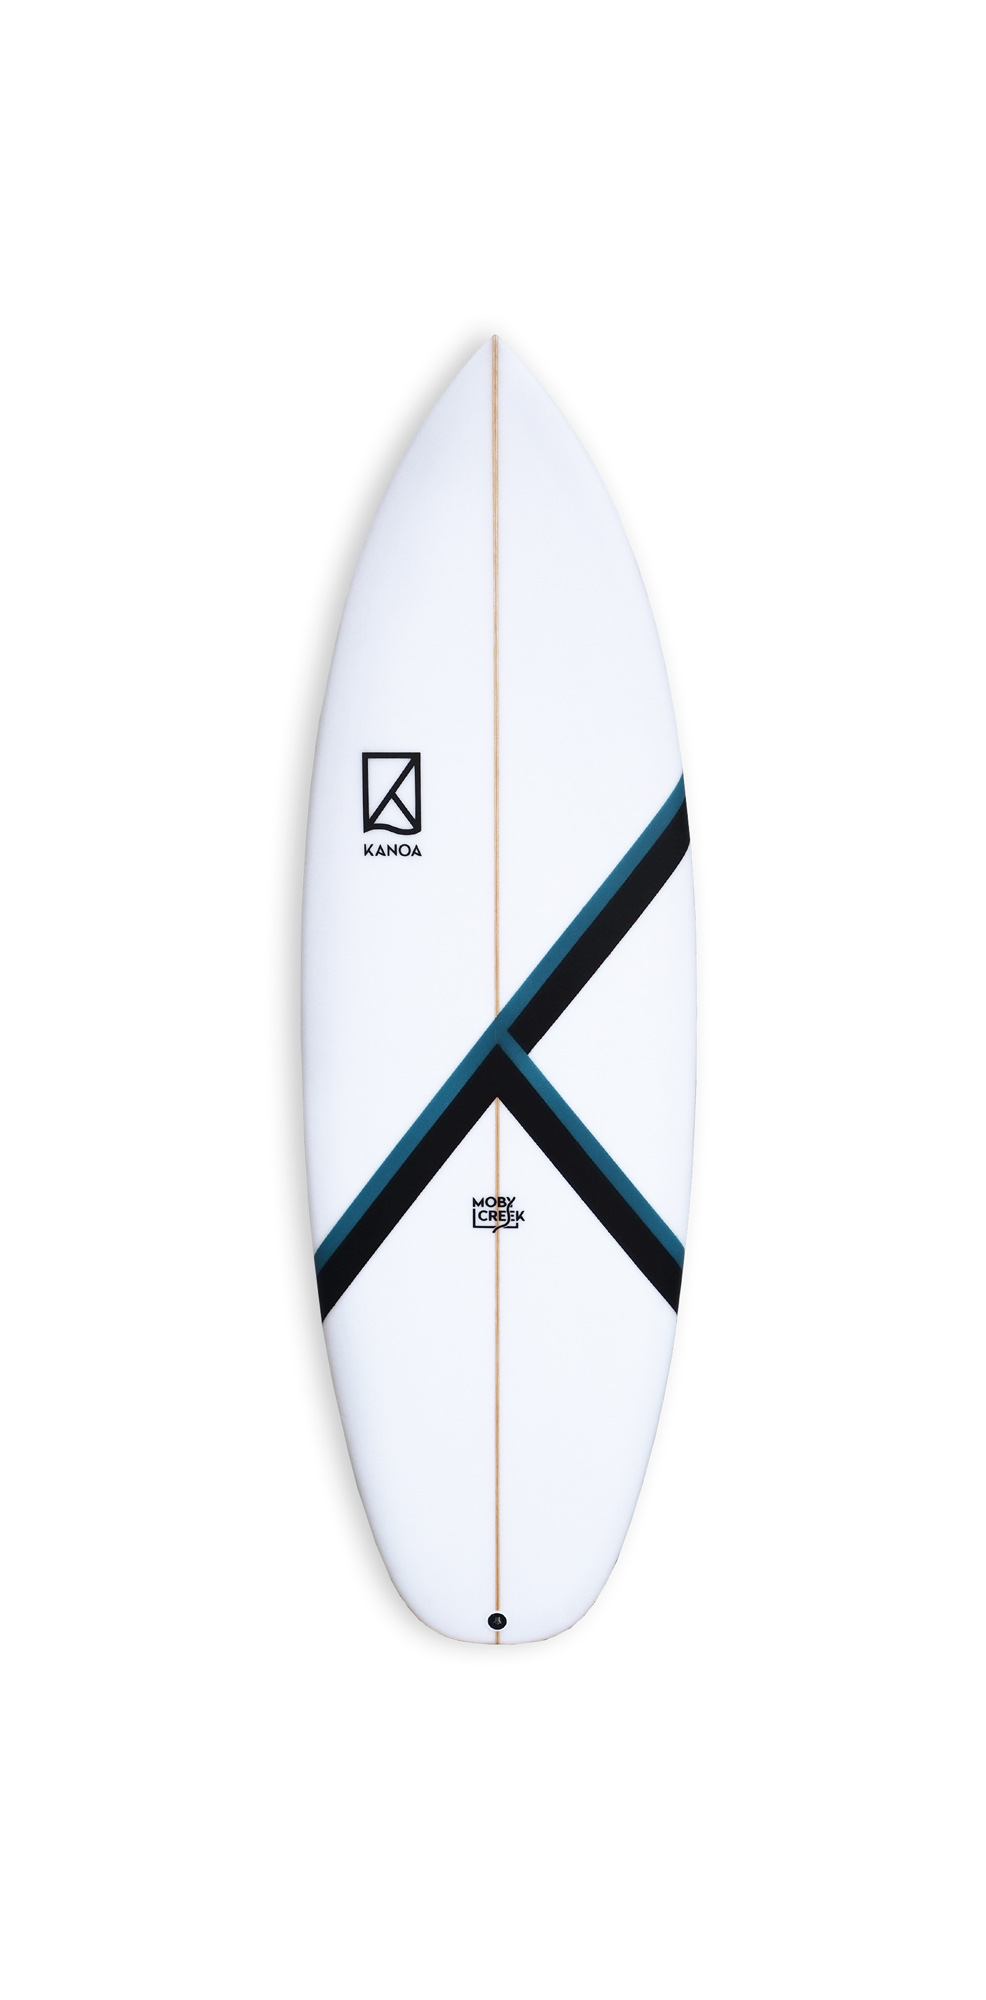 Image of our Performance Riverboard Surfboard Moby Creek 2.0